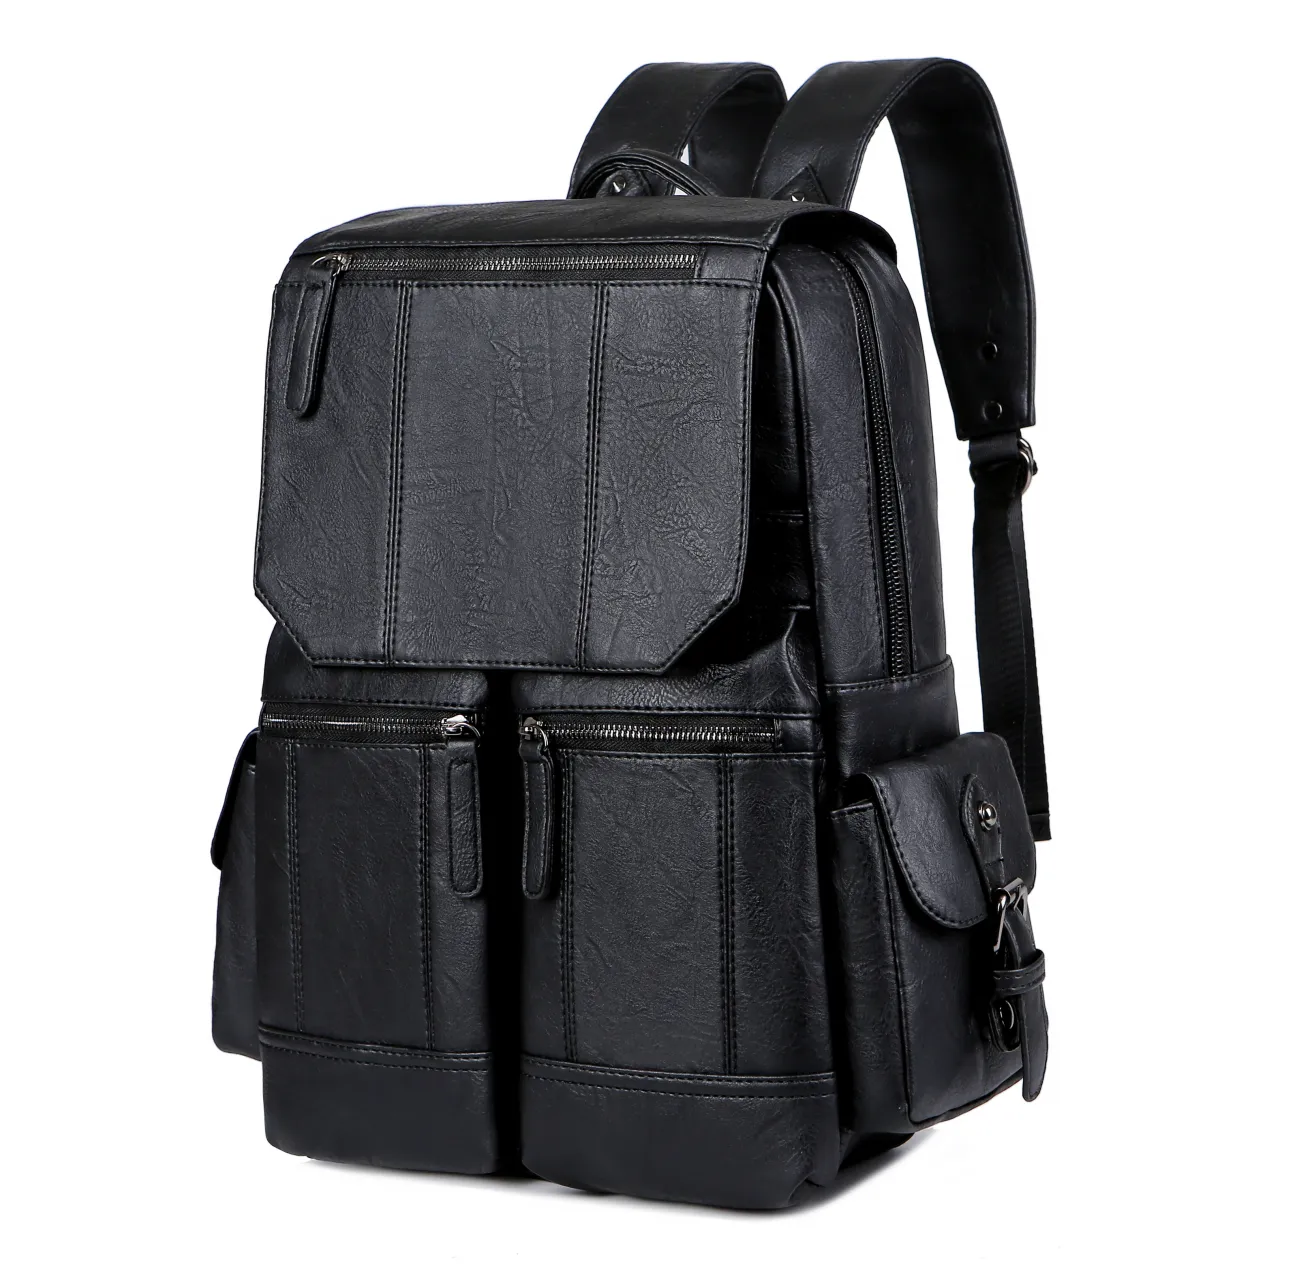 stylish multifunctional backpack with PU leather high quality wholesale business bag large capacity hot selling backpack bag